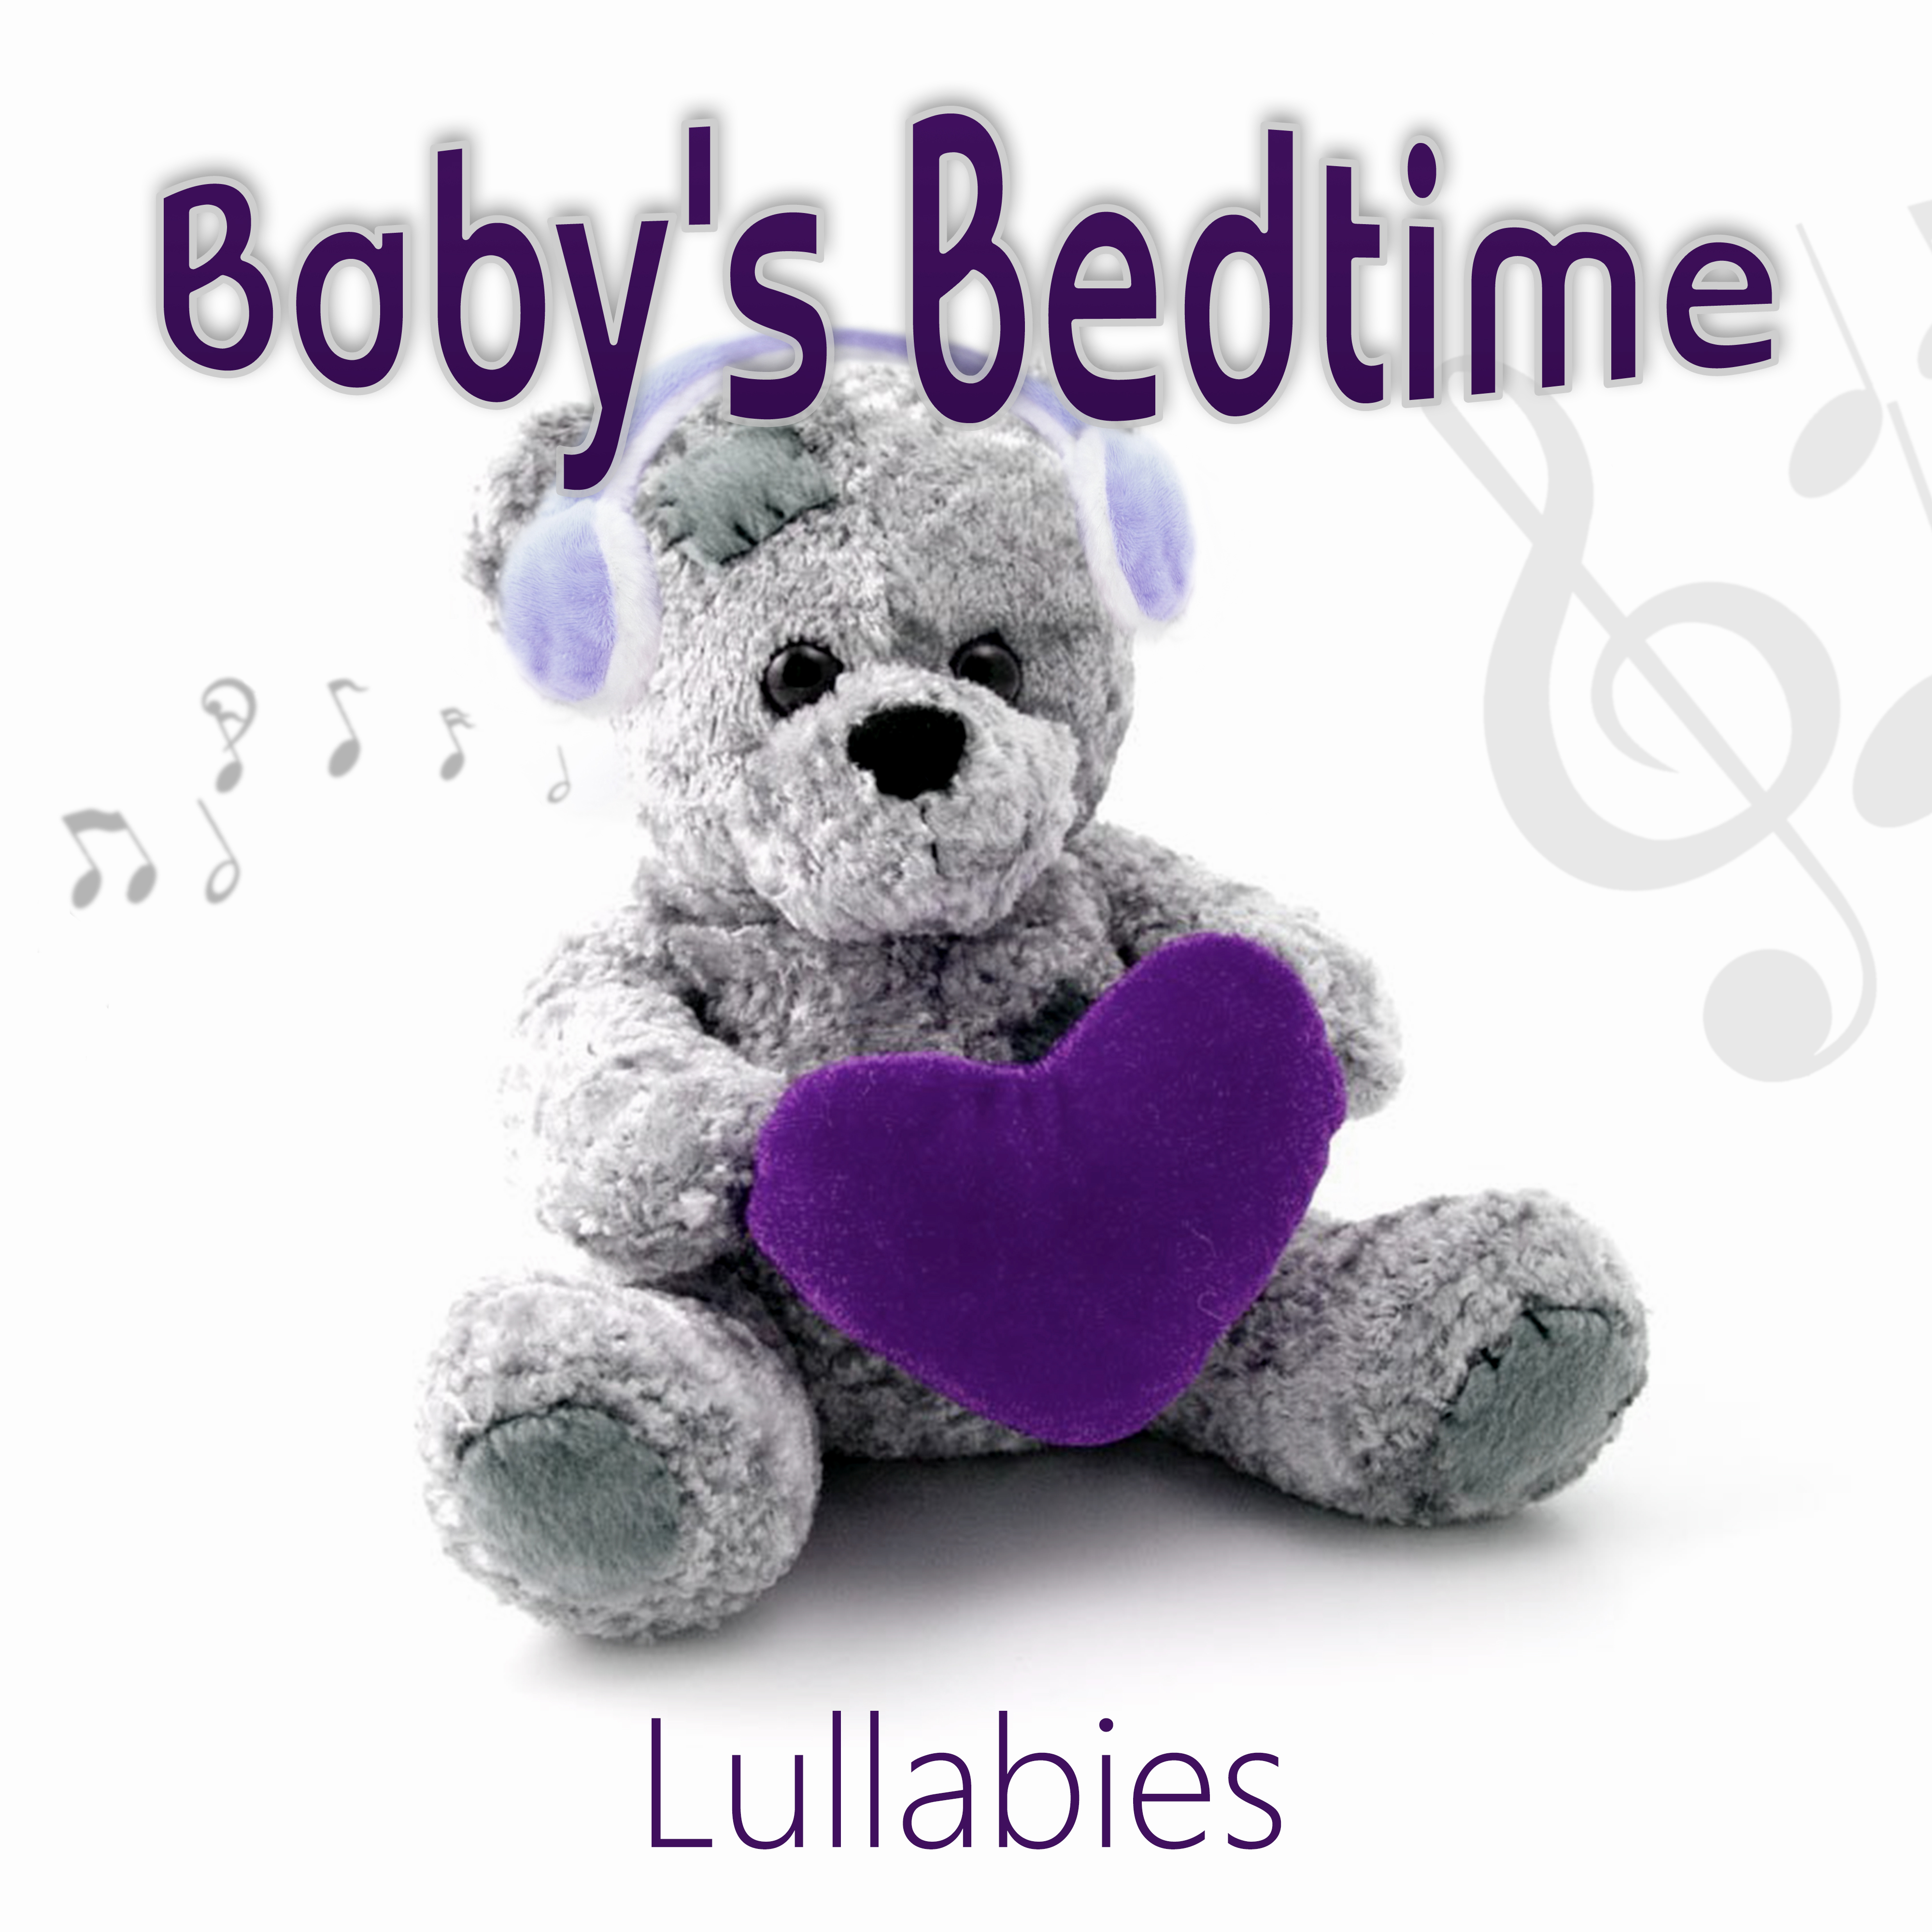 Baby' s Bedtime Lullabies  Piano Lullabies with Nature Sounds for Baby Sleep, Nursery Rhymes, White Noise, Newborn Sleep Music